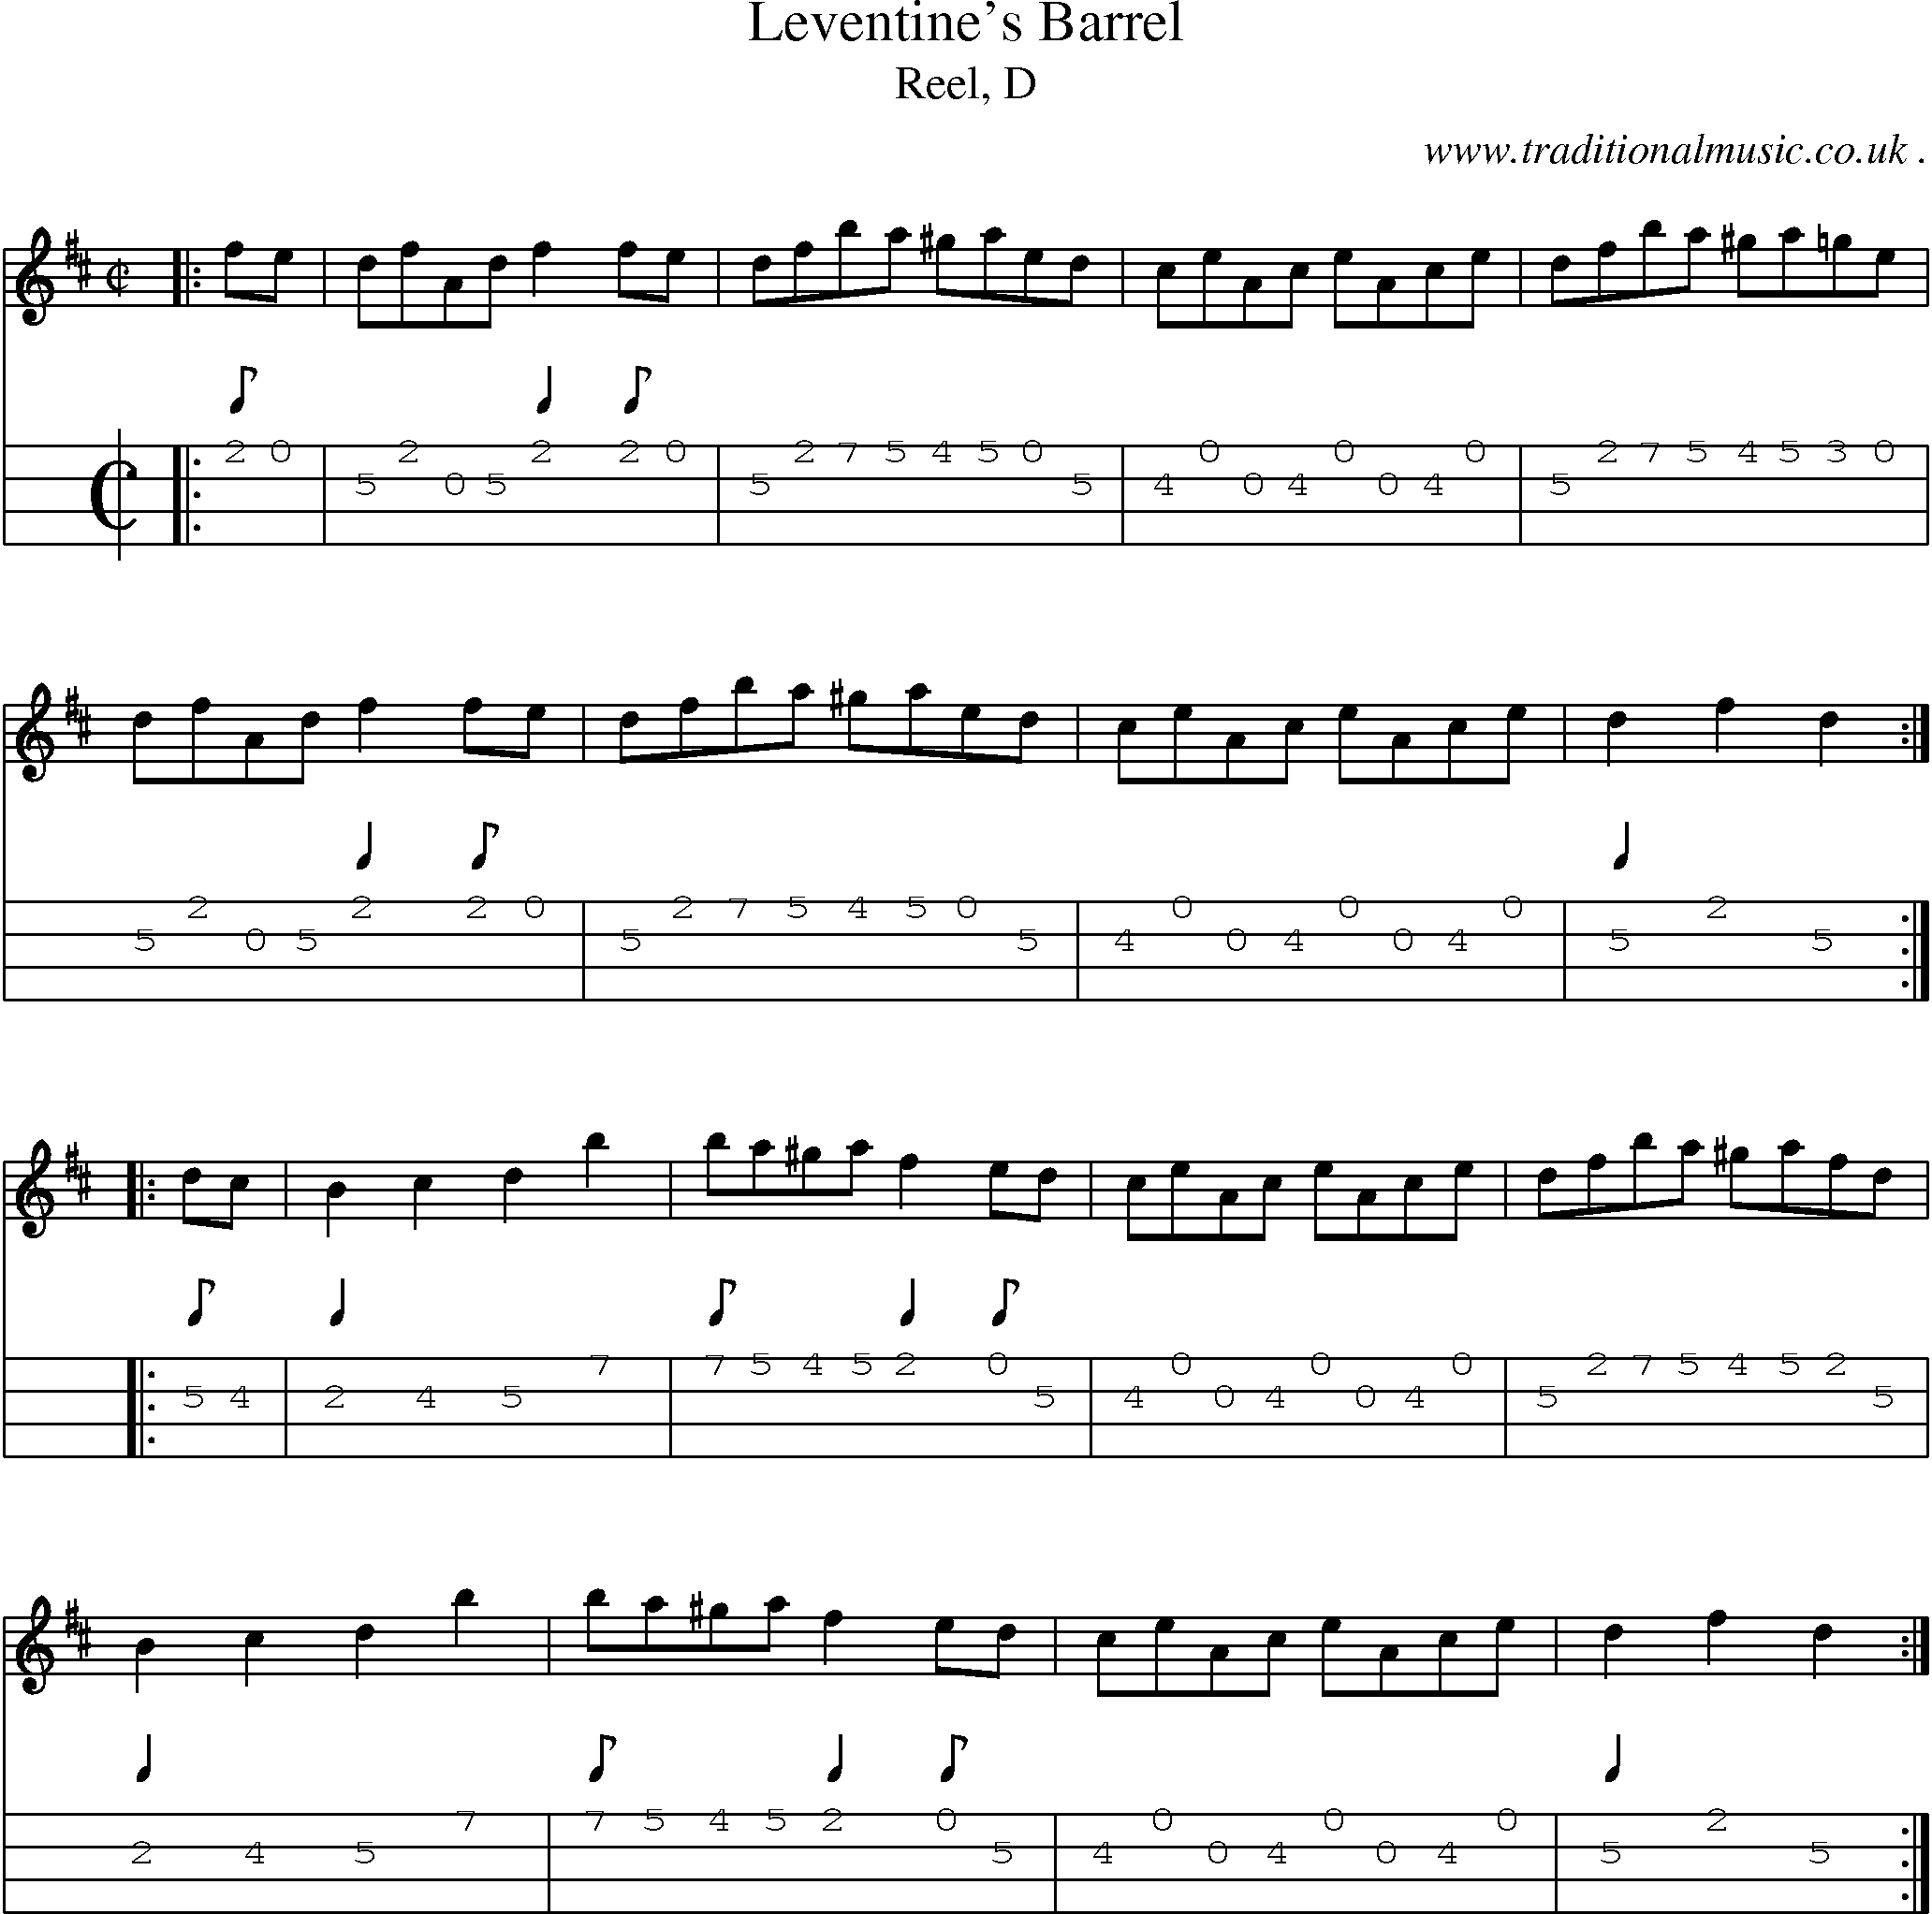 Sheet-music  score, Chords and Mandolin Tabs for Leventines Barrel